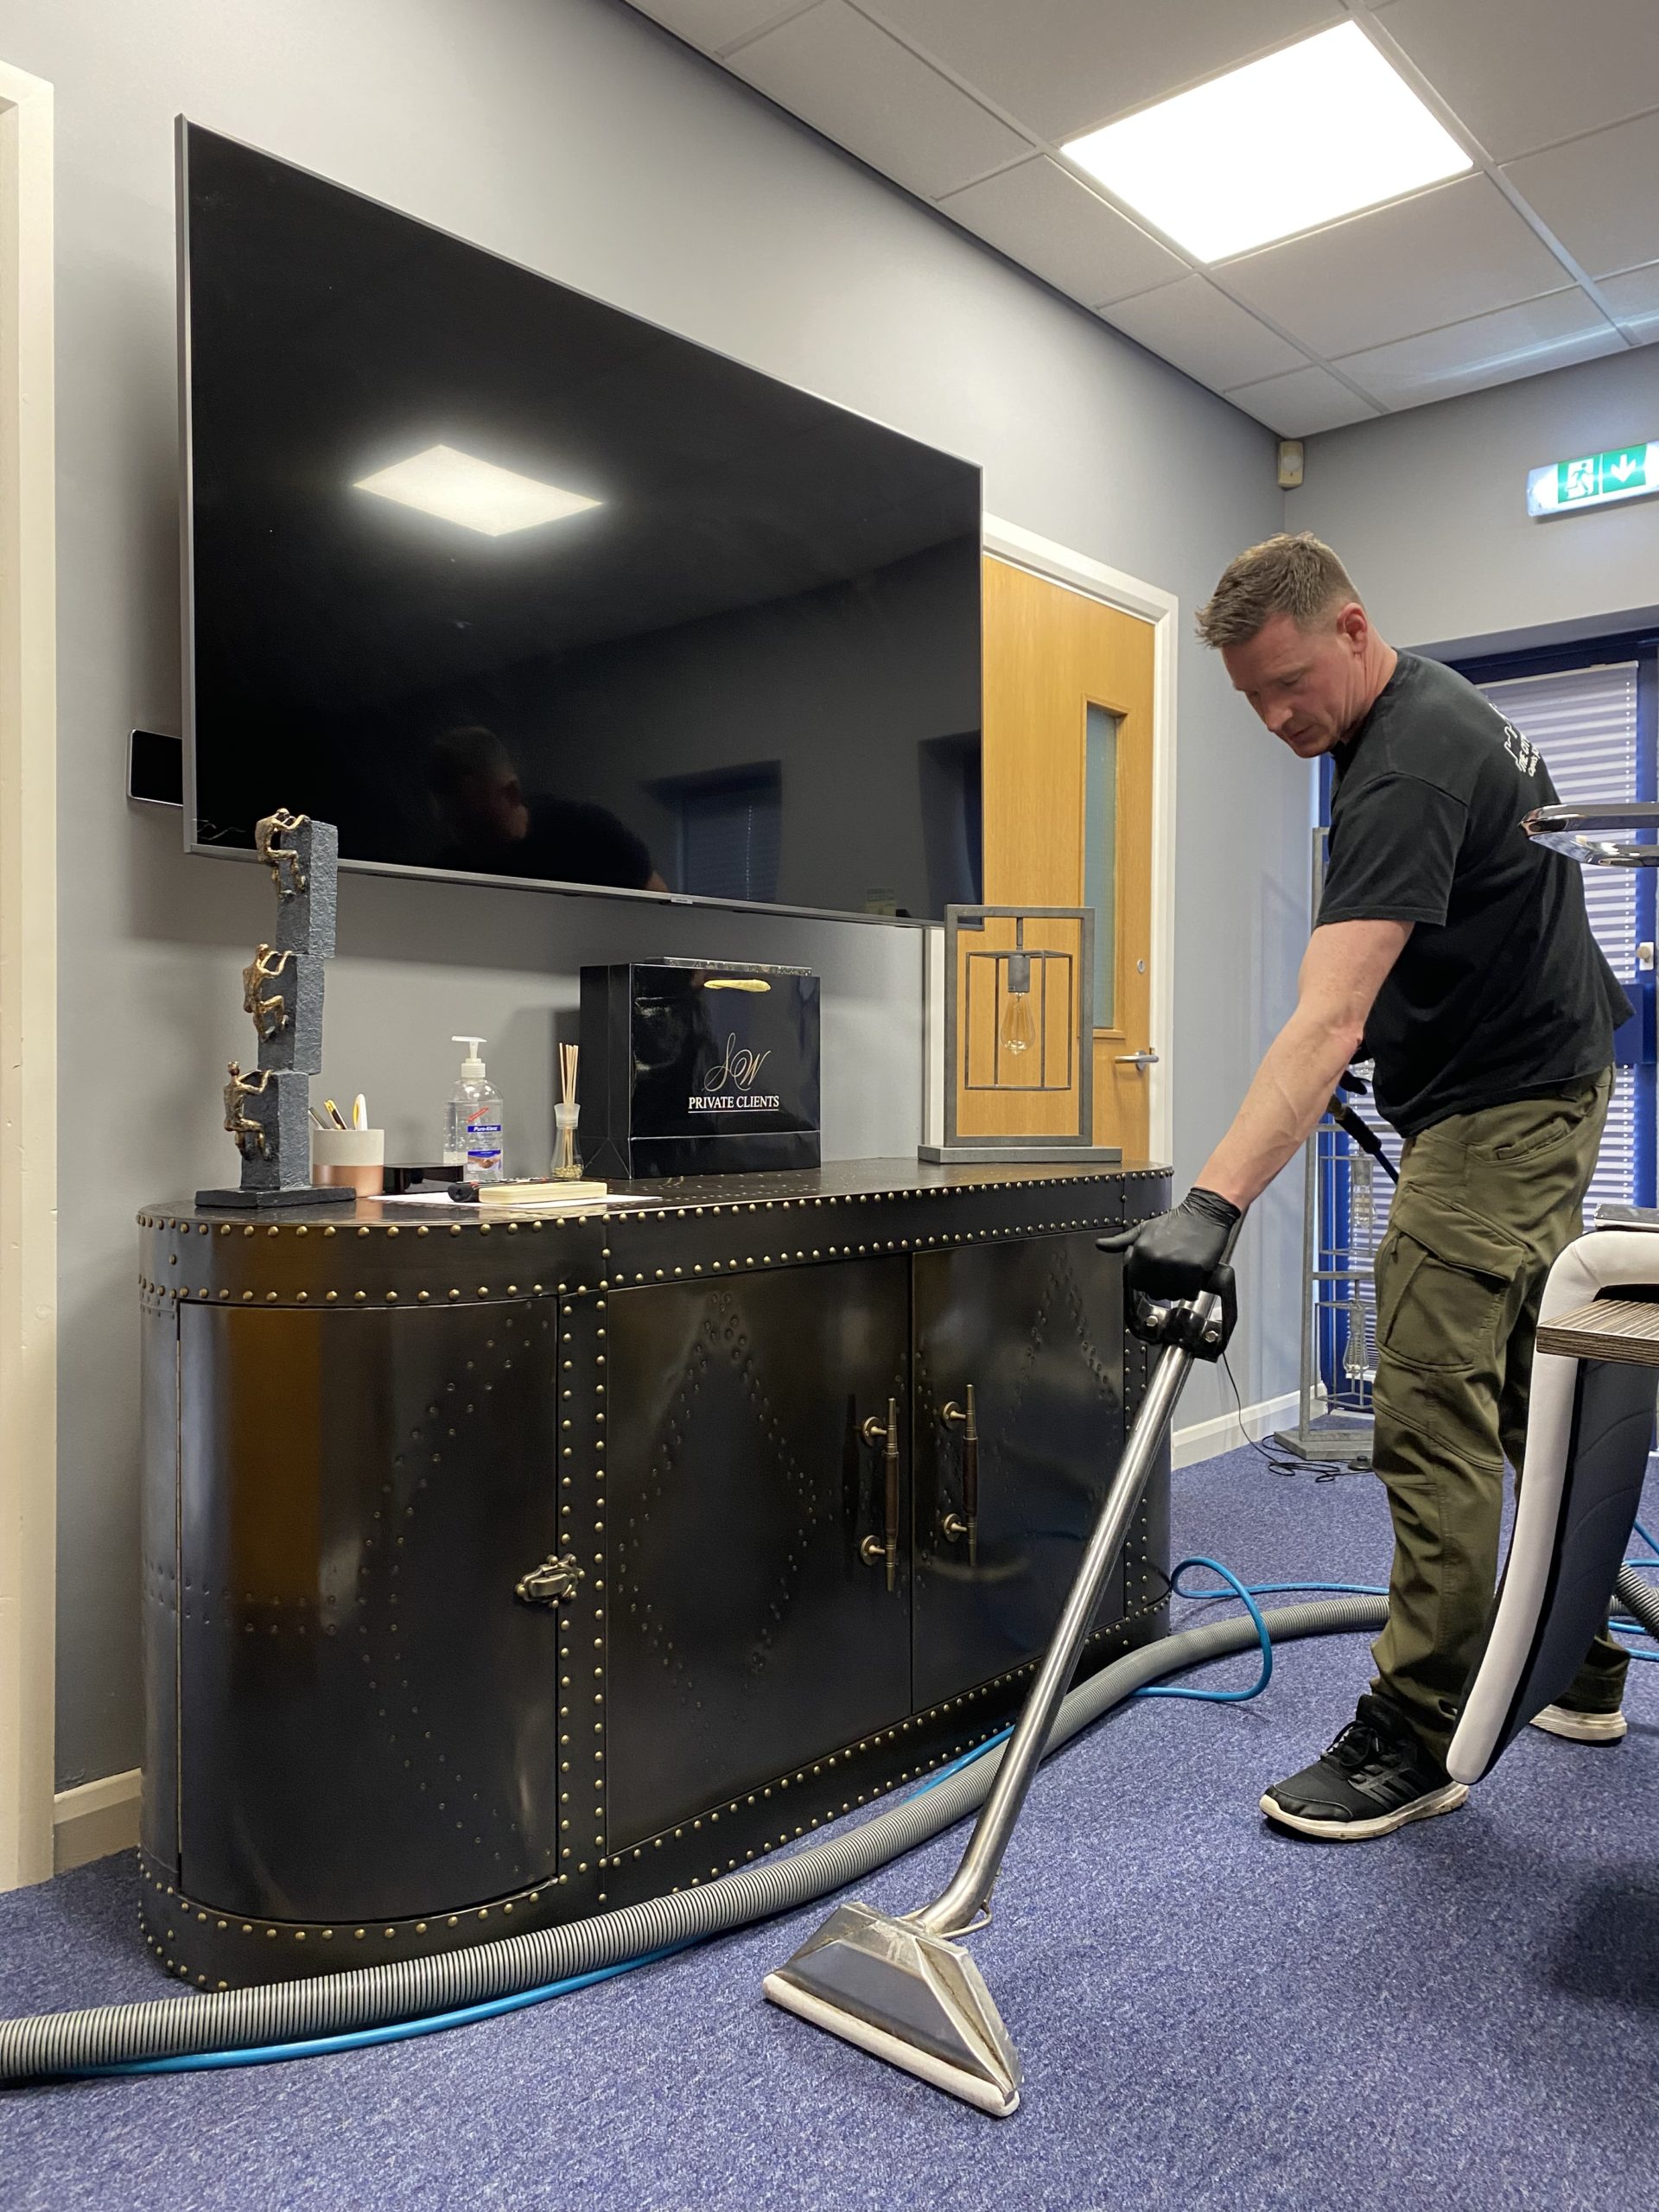 Care home carpet cleaning in Leeds